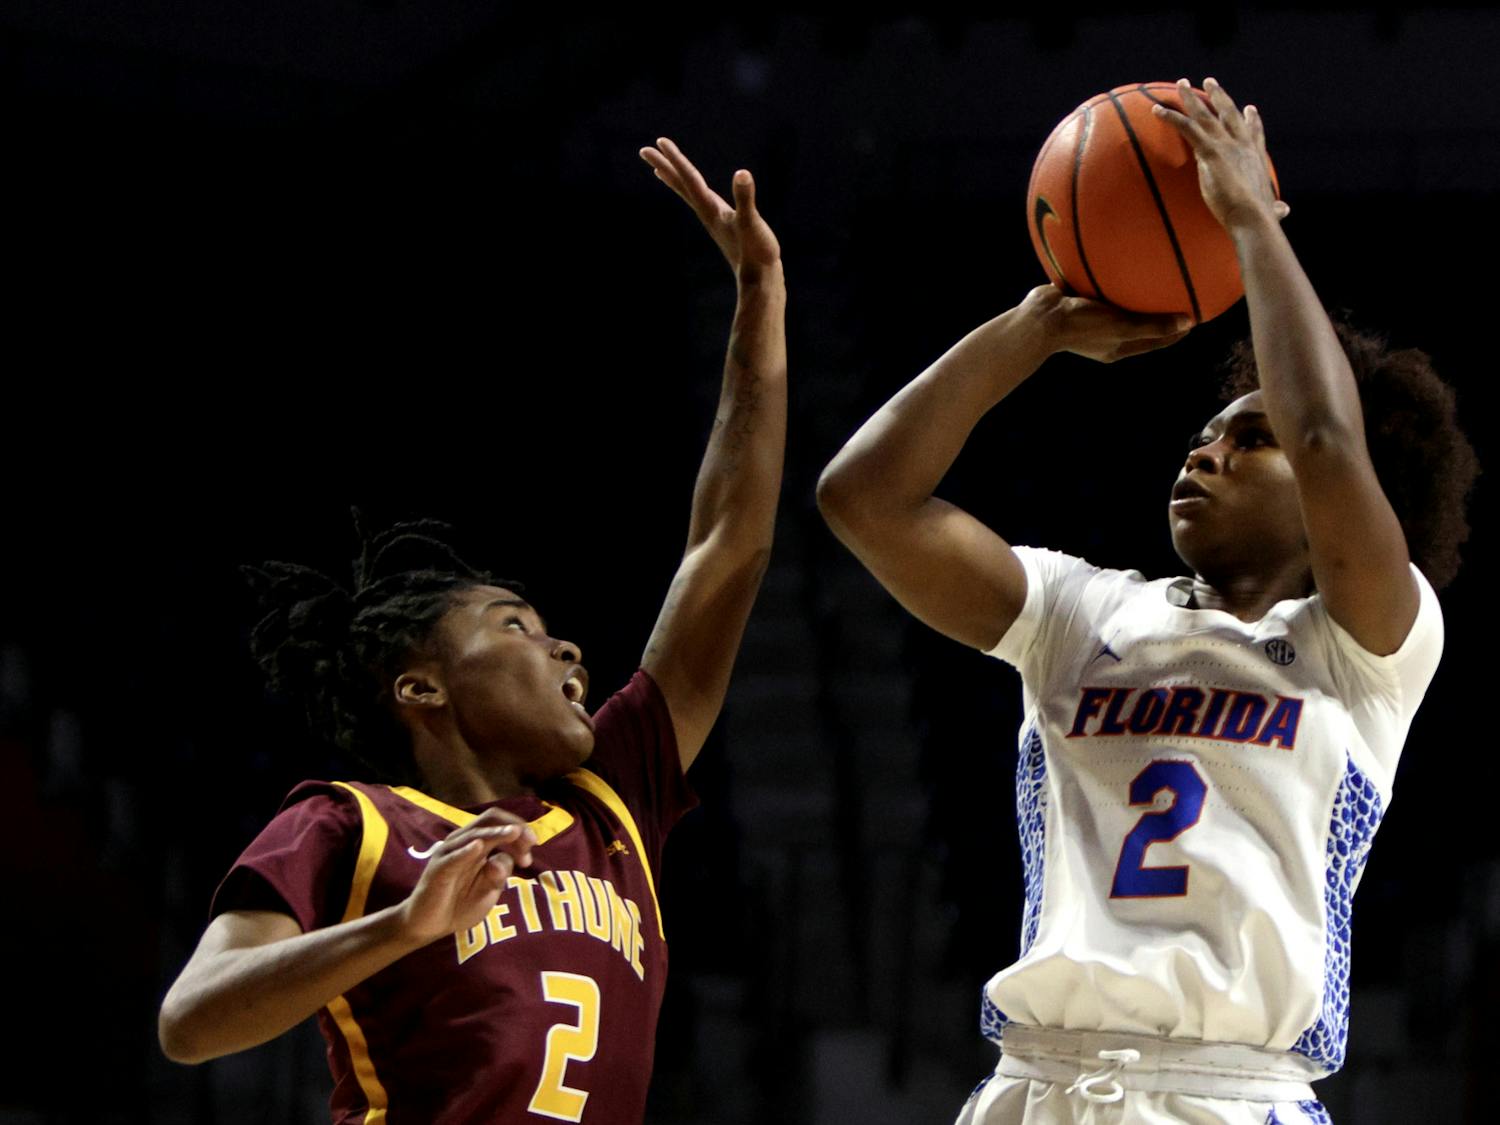 Senior guard Aliyah Matharu shoots a jumpshot in the Gators' 83-69 win against the Bethune-Cookman Wildcats on Thursday, Nov. 9, 2023.